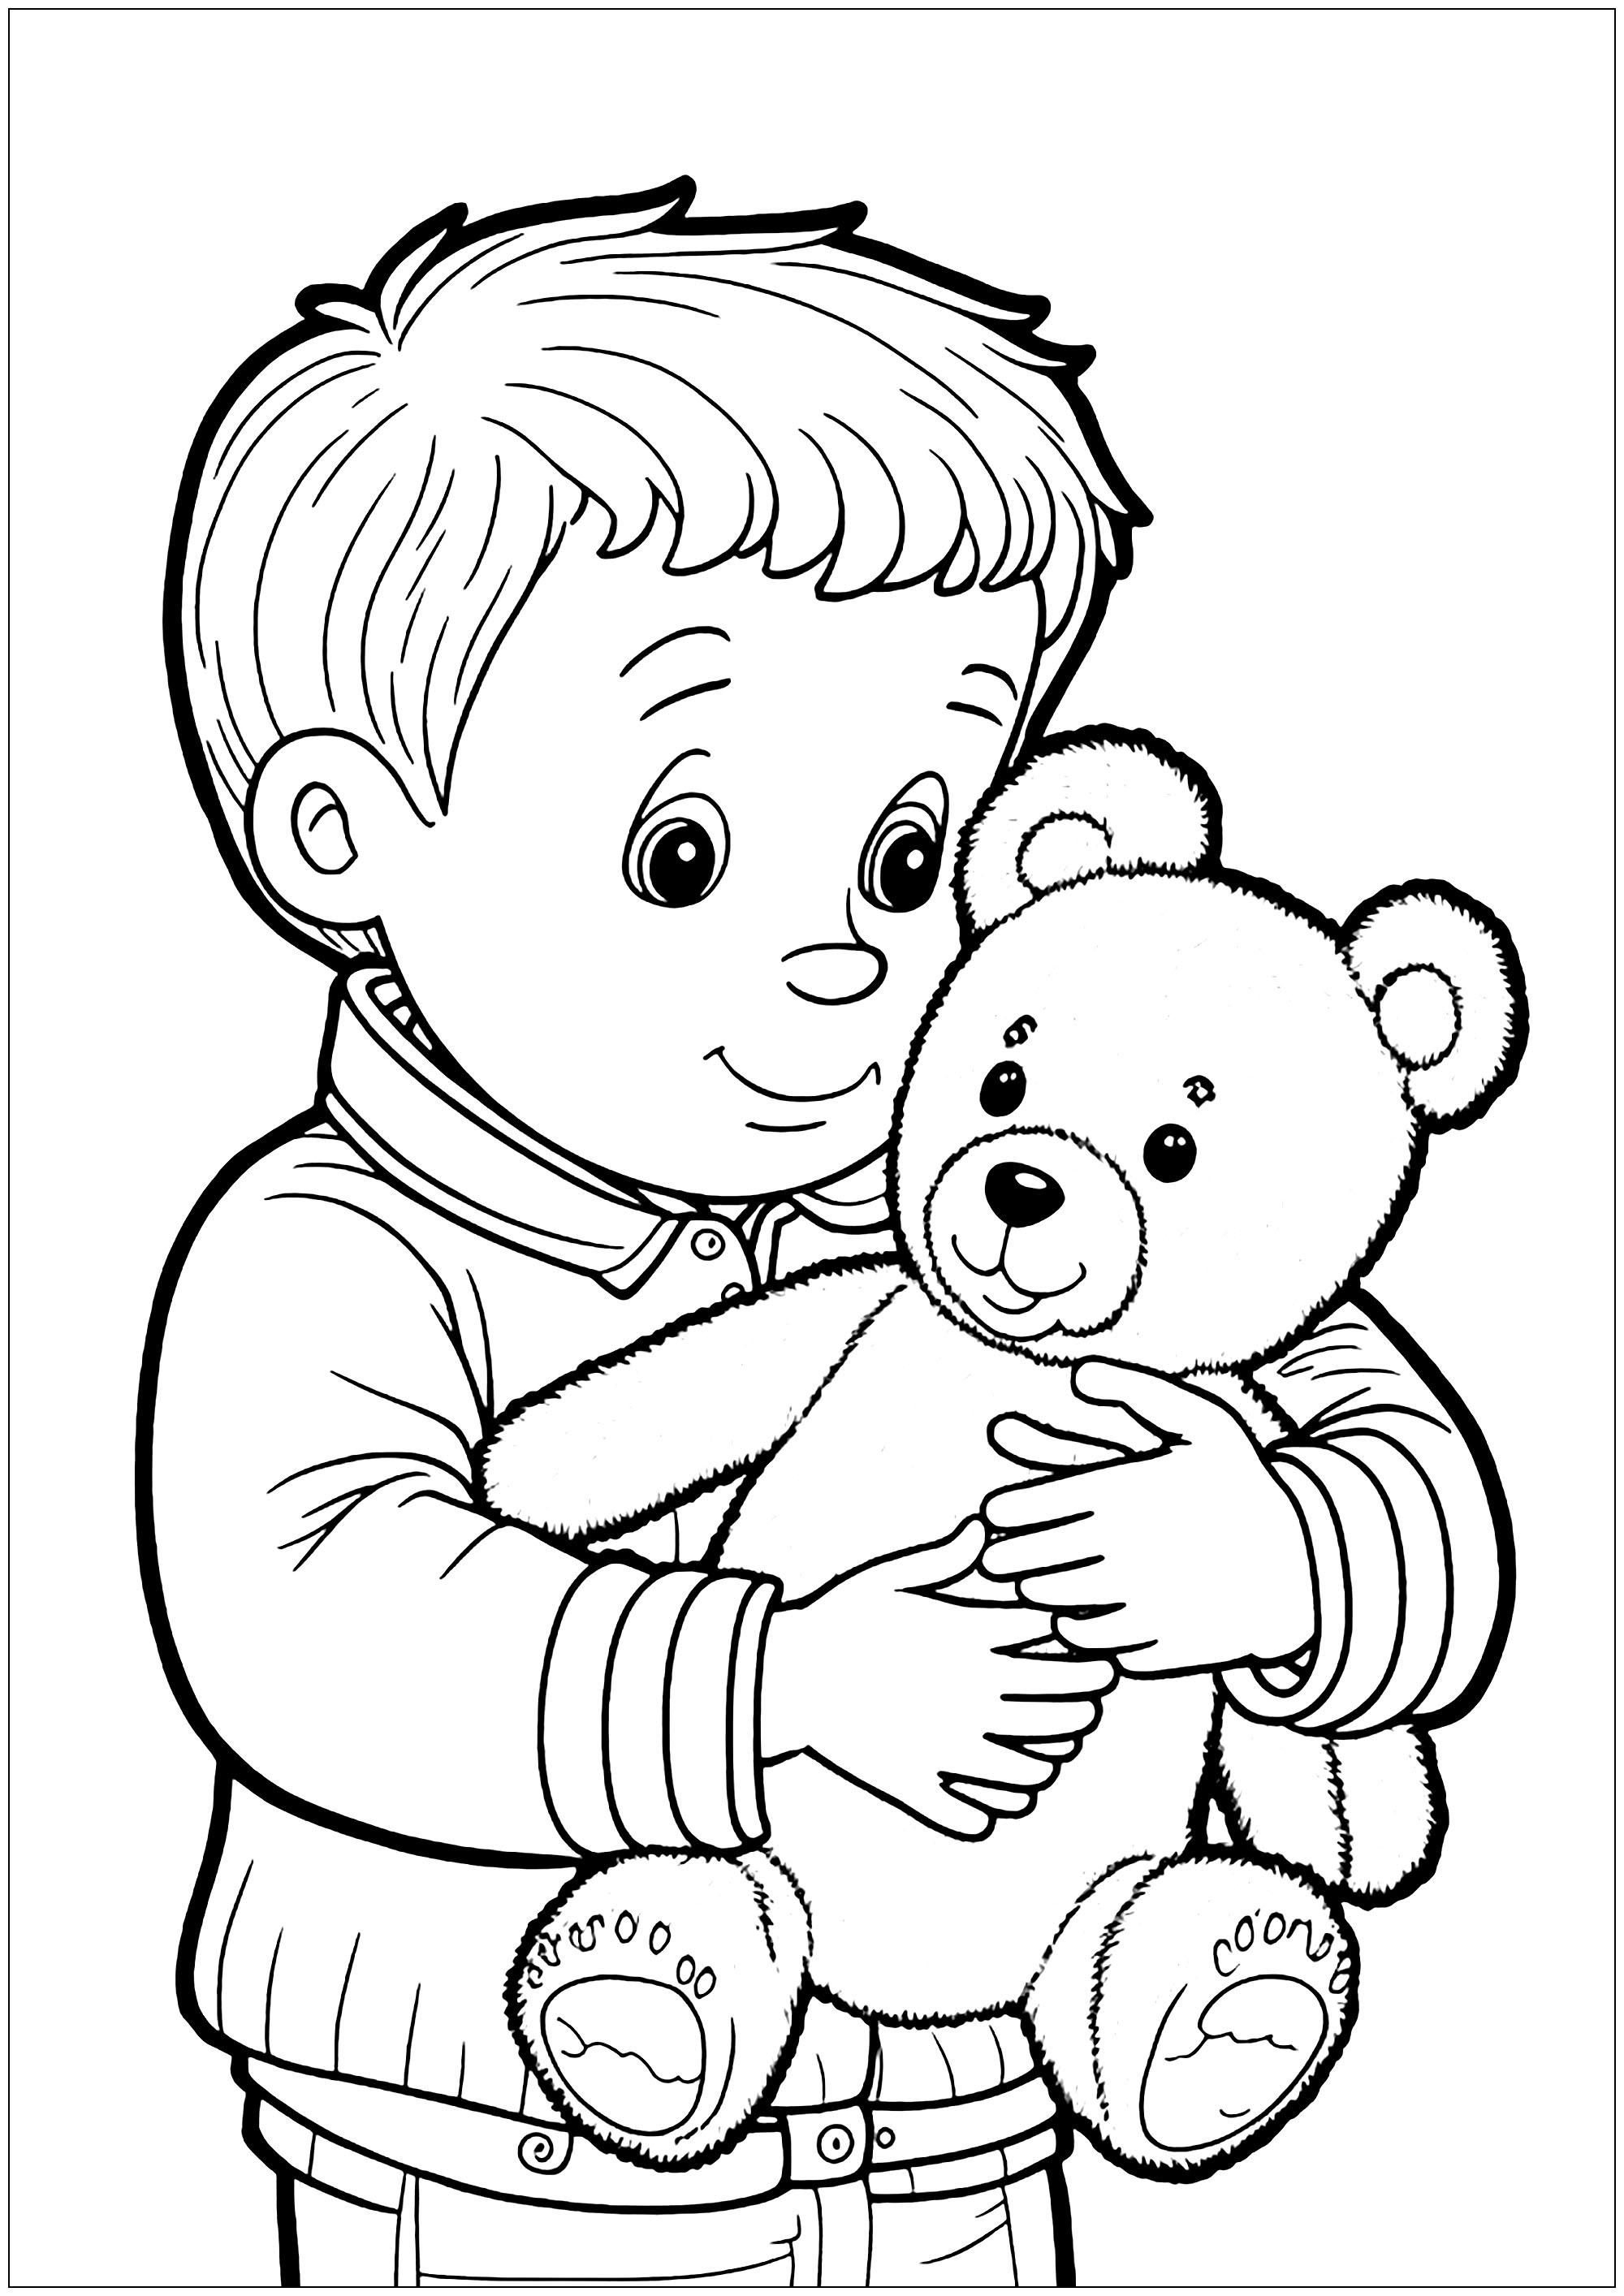 A young boy and his teddy bear